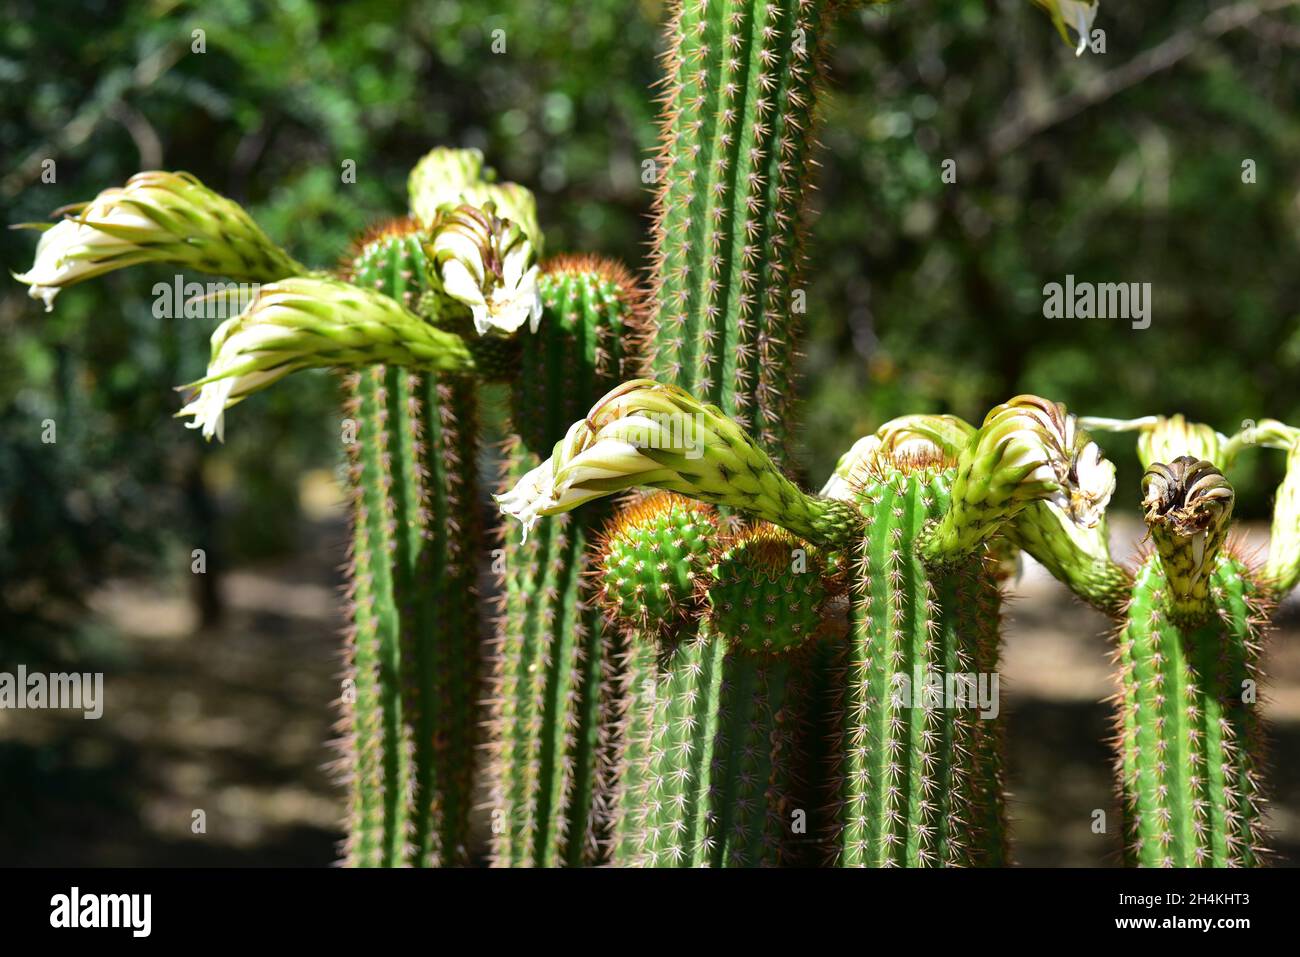 Golden torch (Echinopsis spachiana) is a cactus native to Argentina. Stock Photo